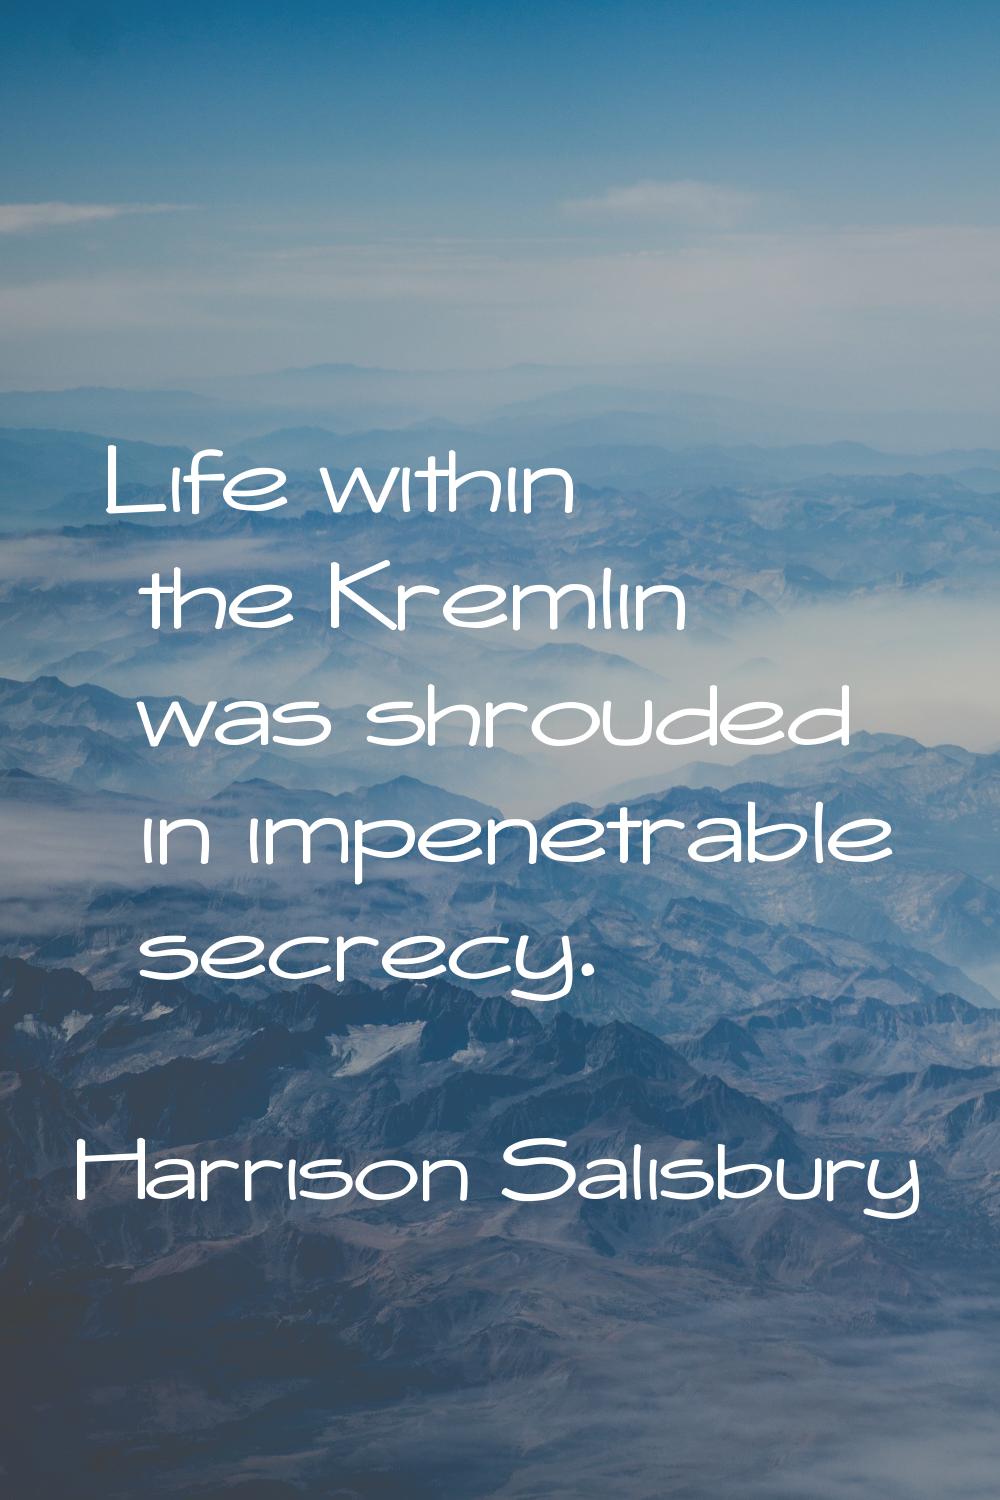 Life within the Kremlin was shrouded in impenetrable secrecy.